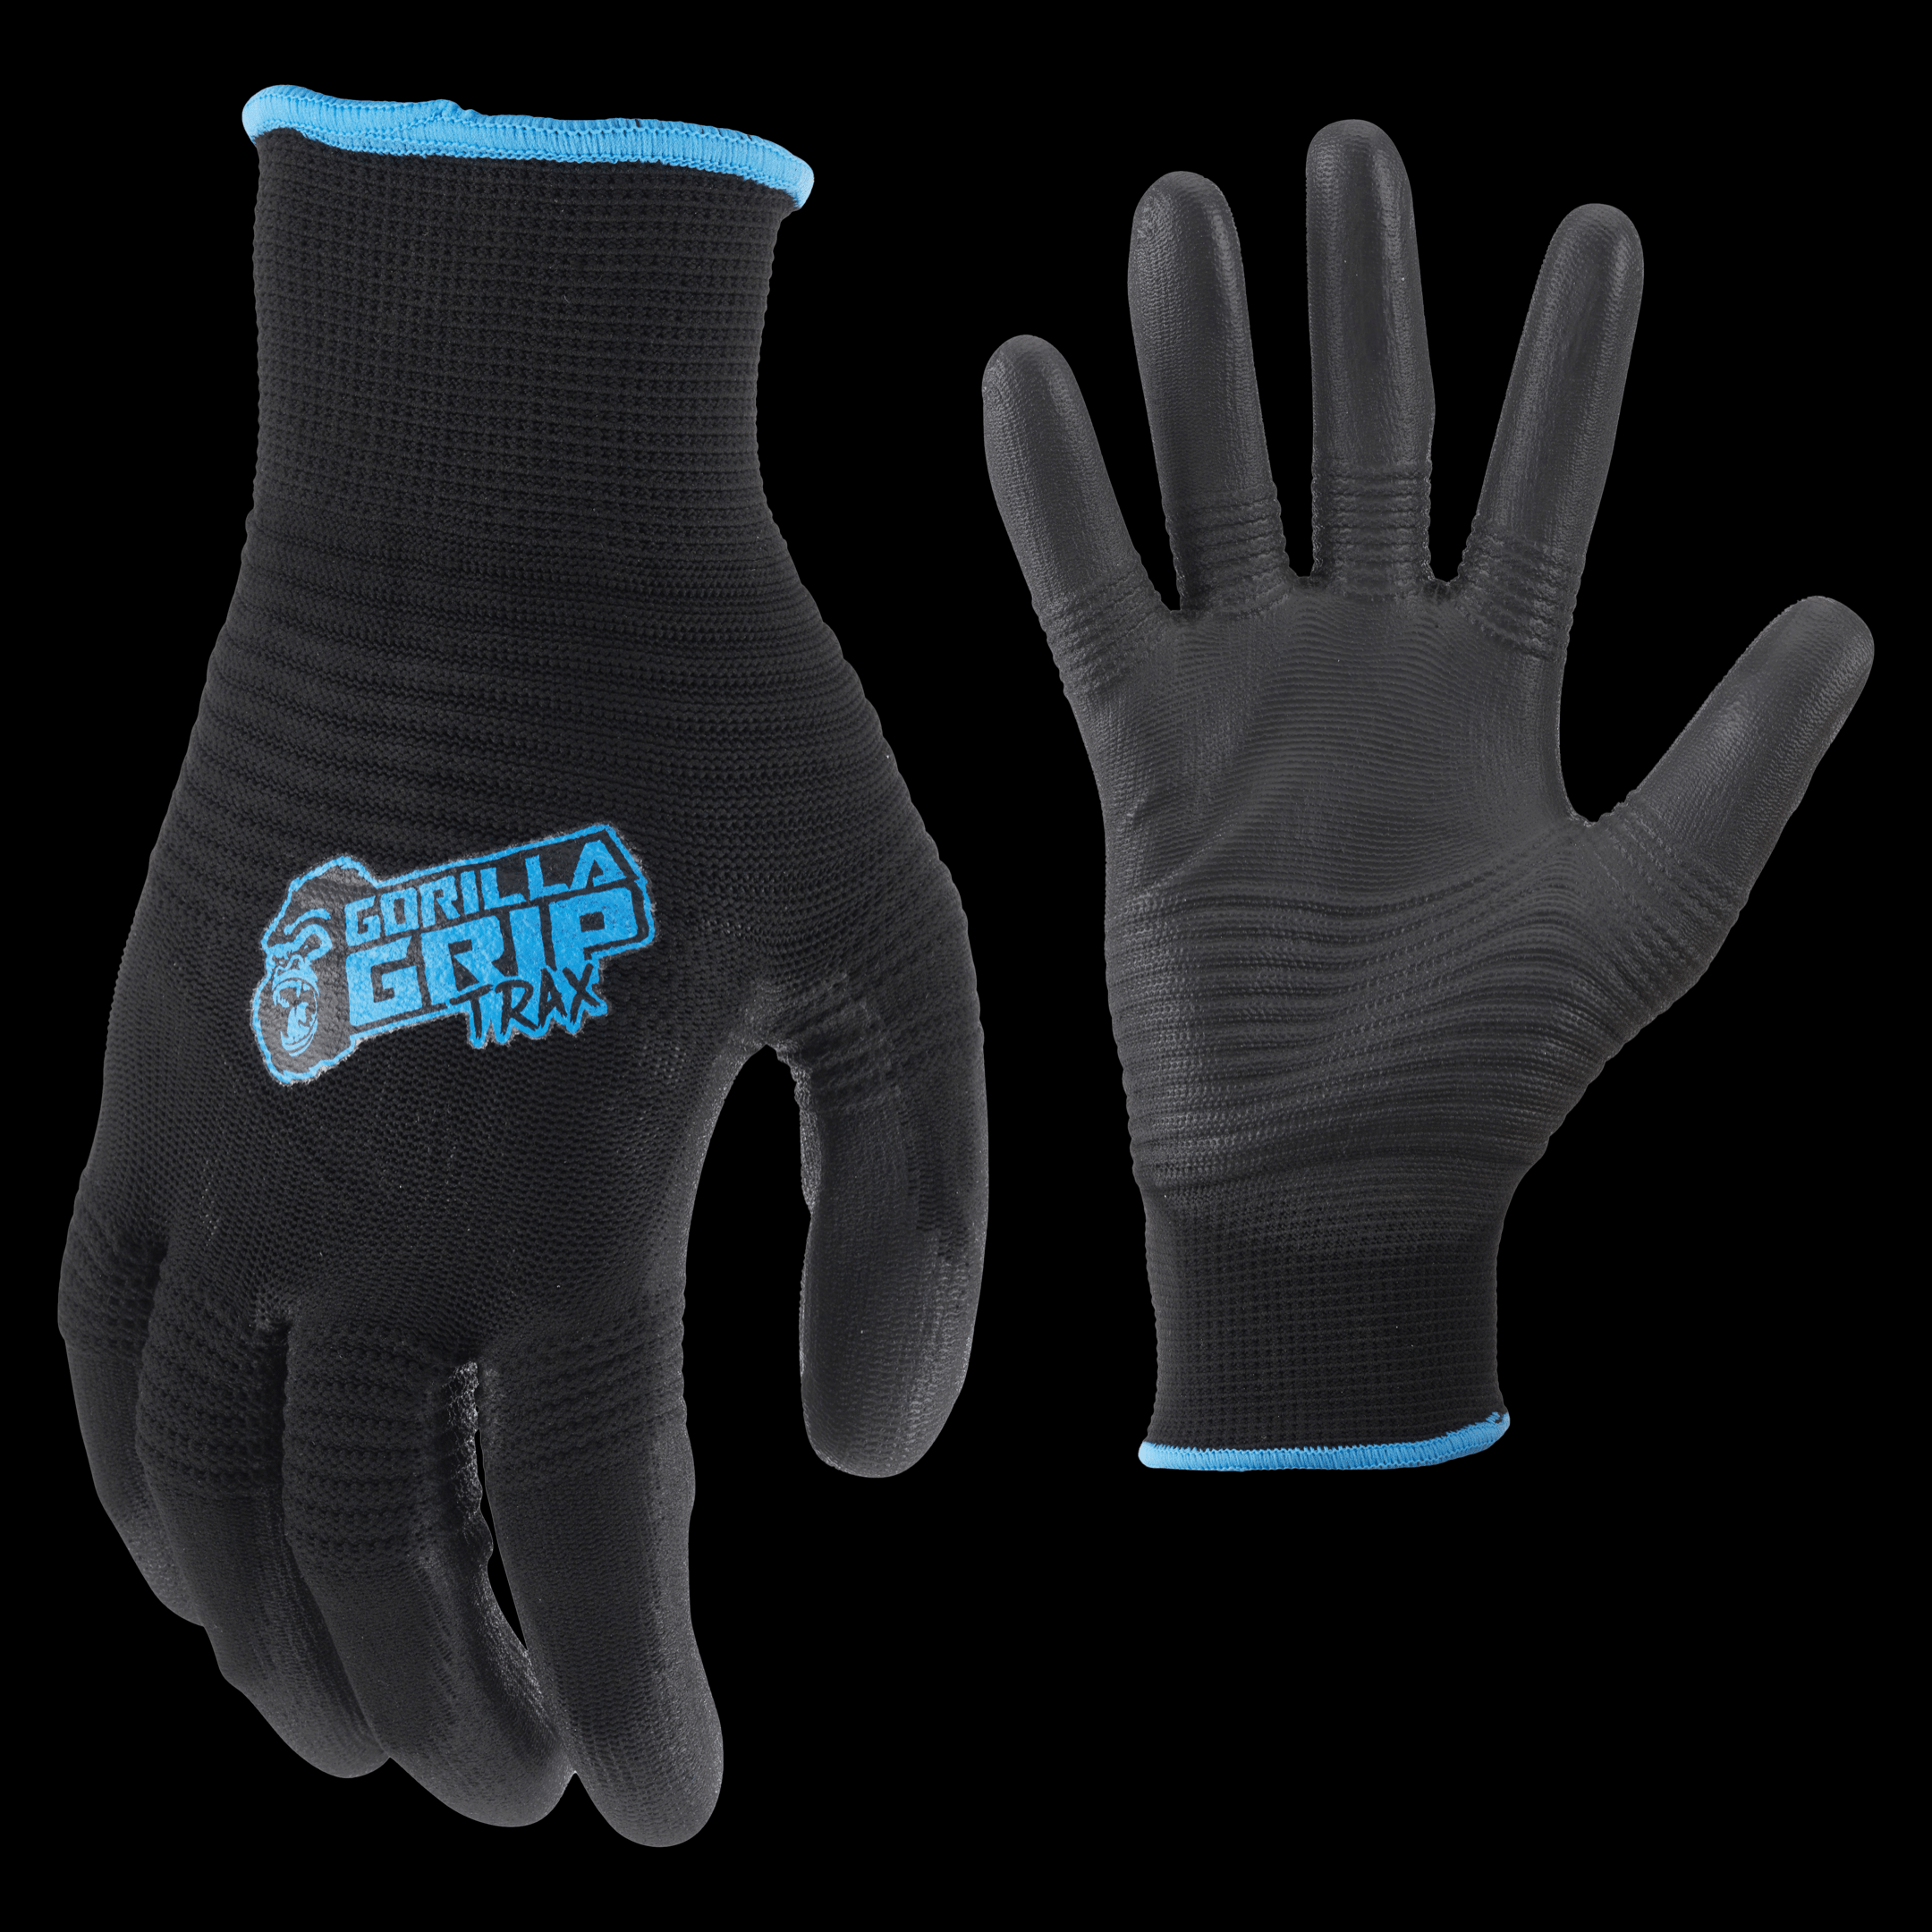 Gorilla Grip TRAX gloves are essential for every HVAC Technician